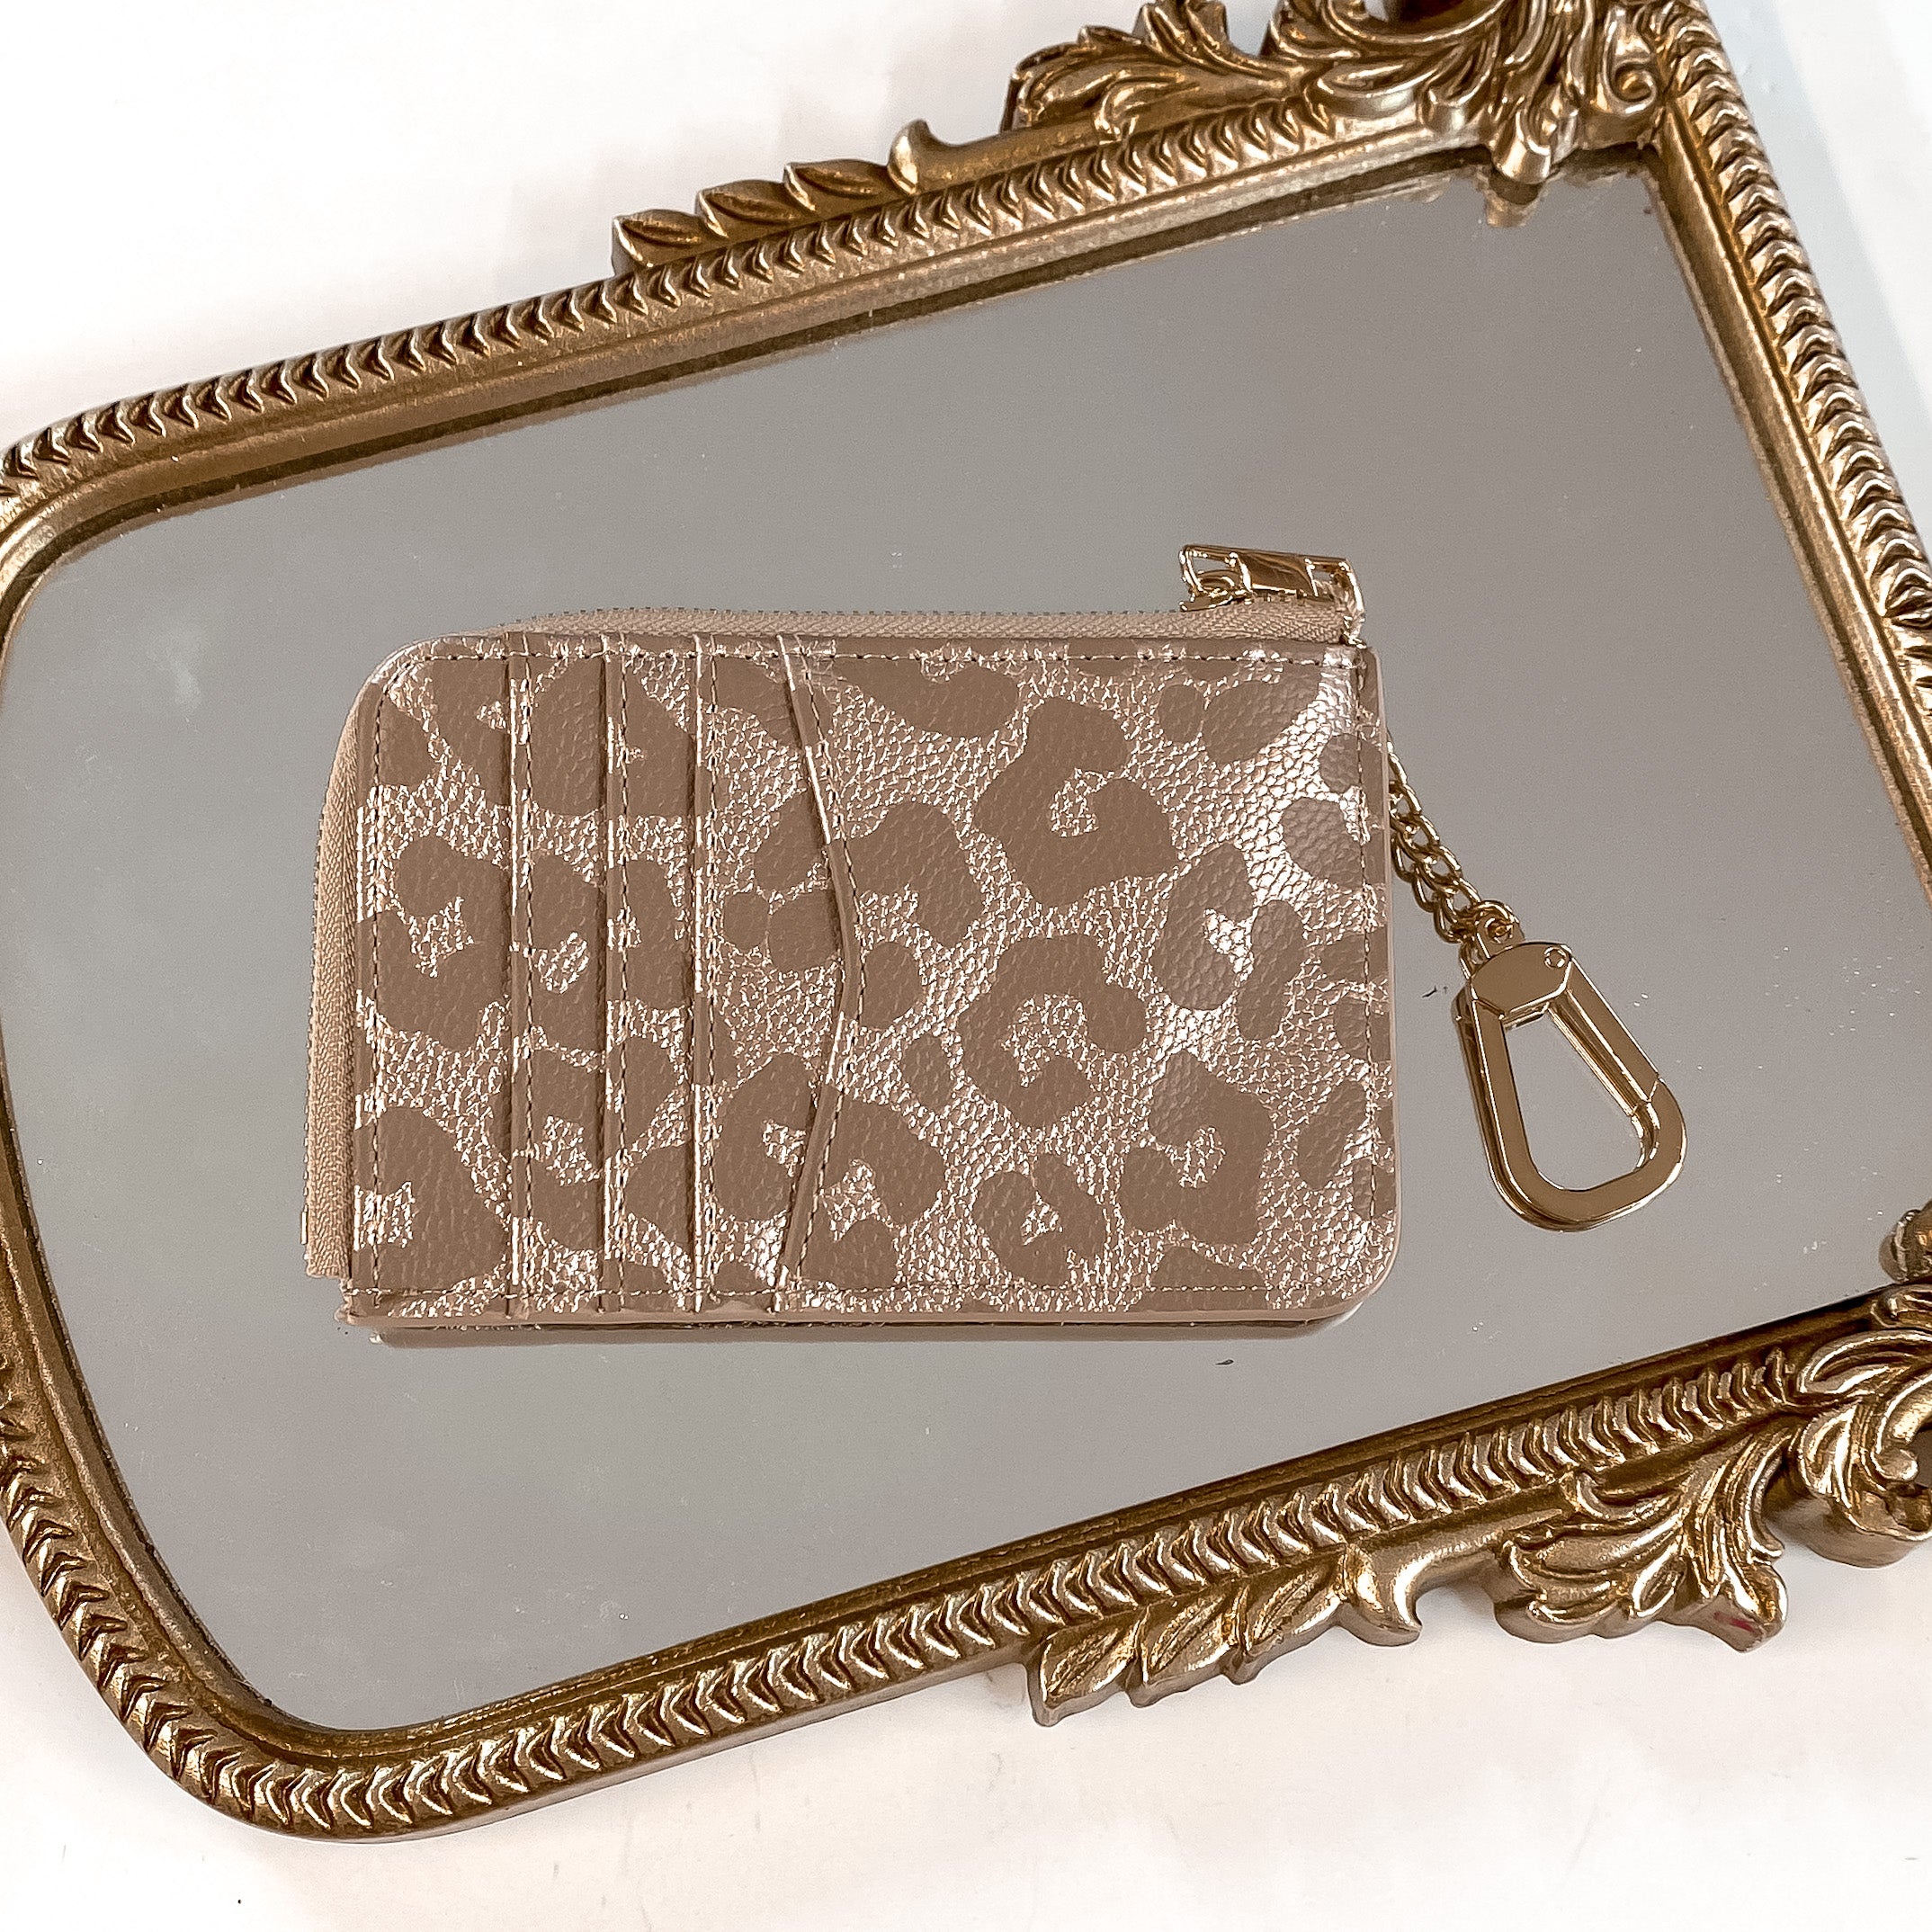 Hollis | COCO Card Holder in Leopard - Giddy Up Glamour Boutique